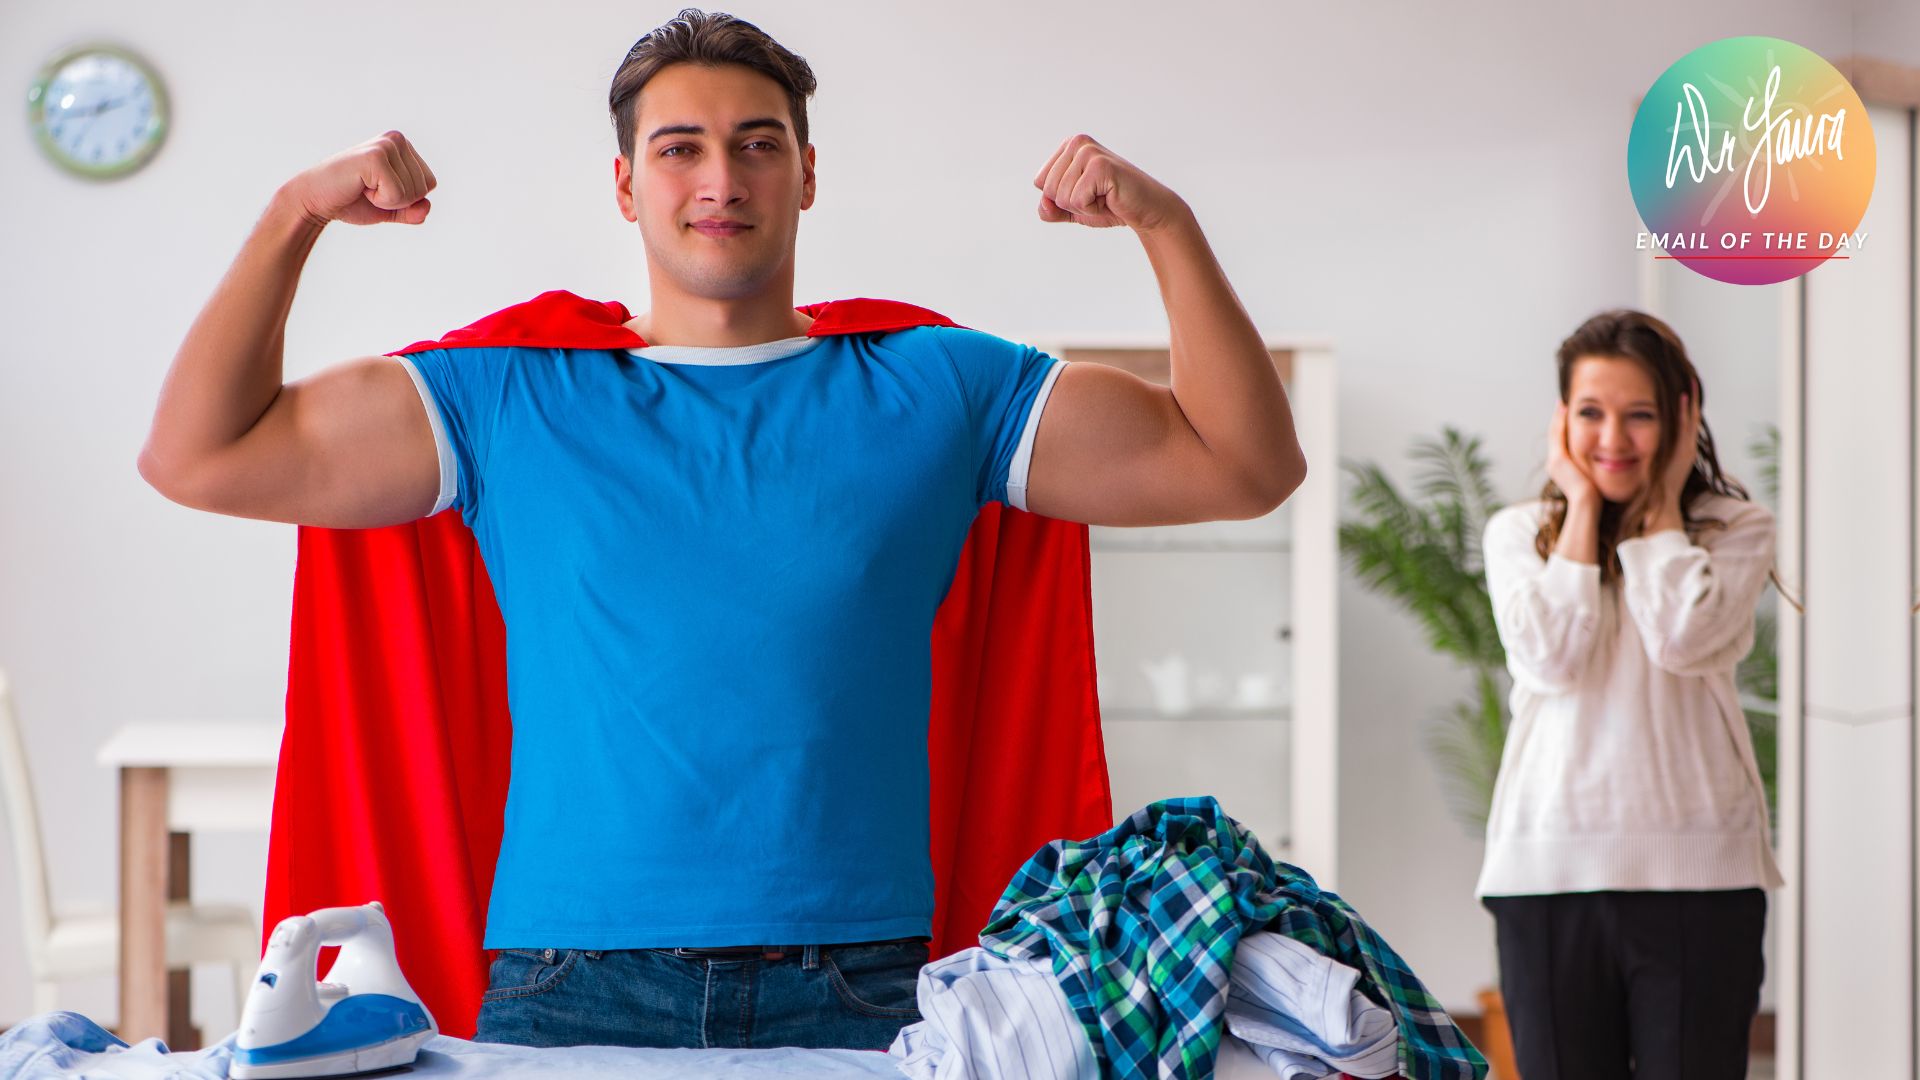 Email of the Day: My Husband, My Superhero